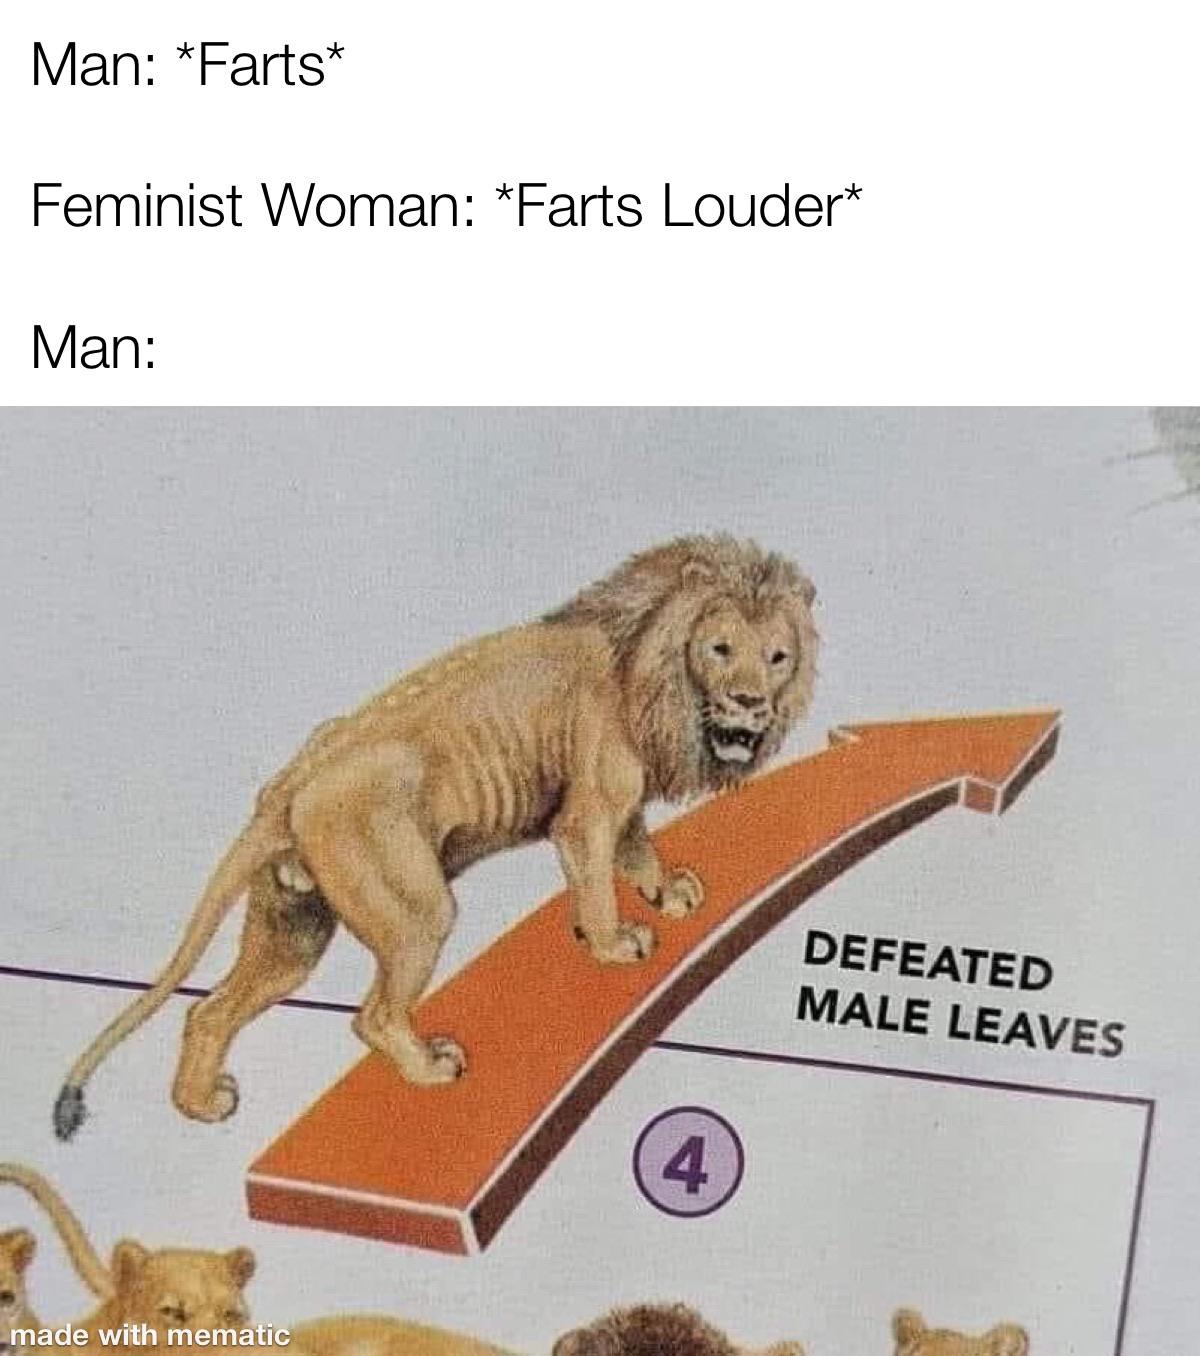 Internet meme - Man Farts Feminist Woman Farts Louder Man Defeated Male Leaves 4 made with mematic